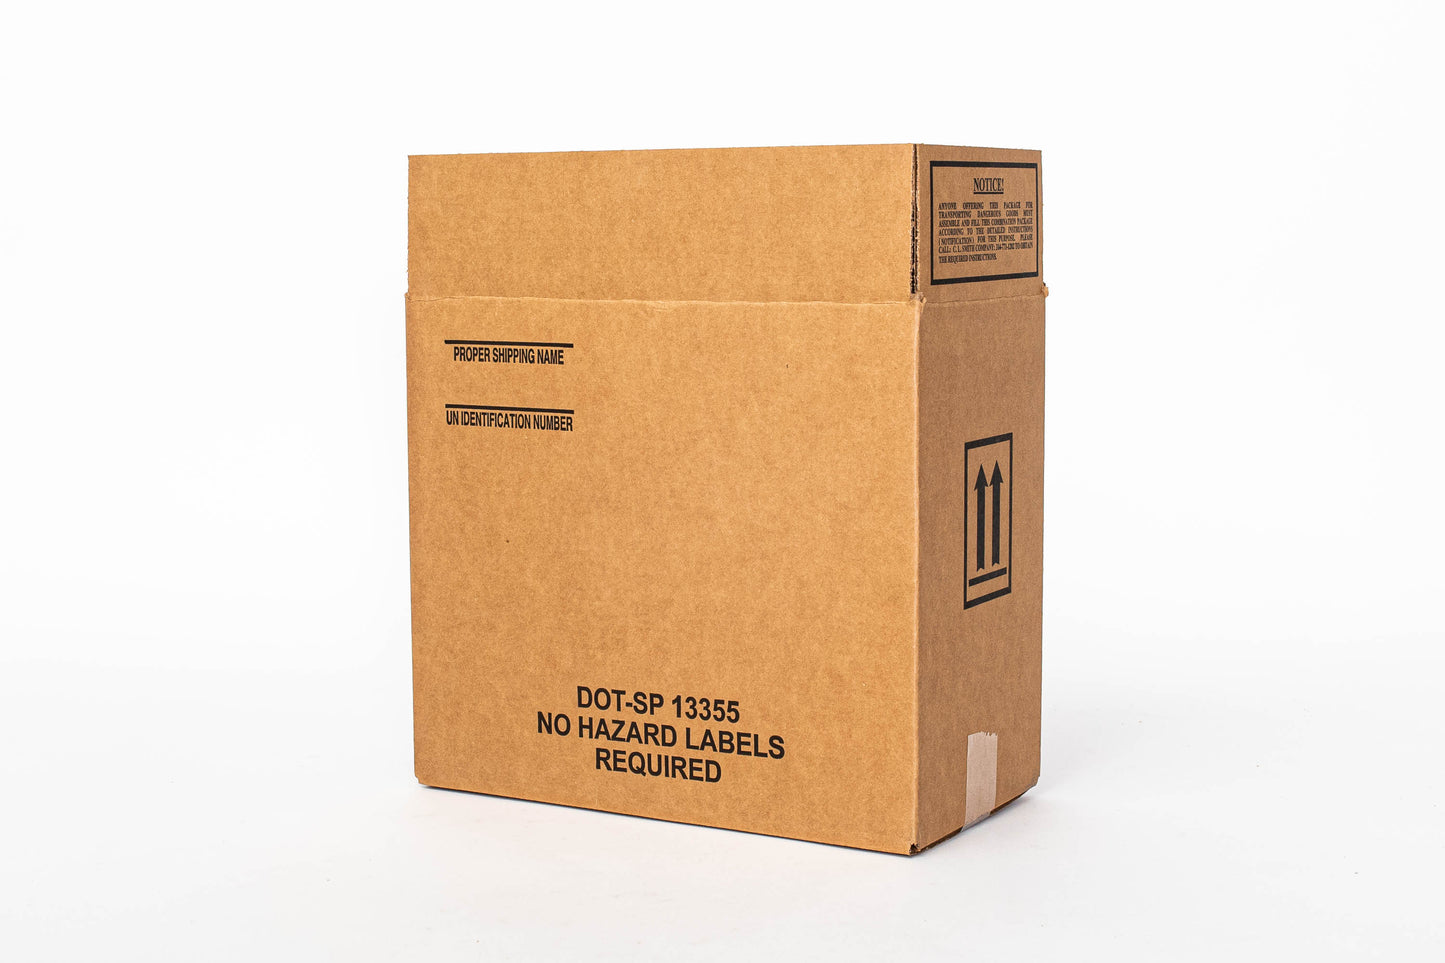 UN4GV 2-in 1 Liter/32 oz (or less) Special Permit Packaging Kit